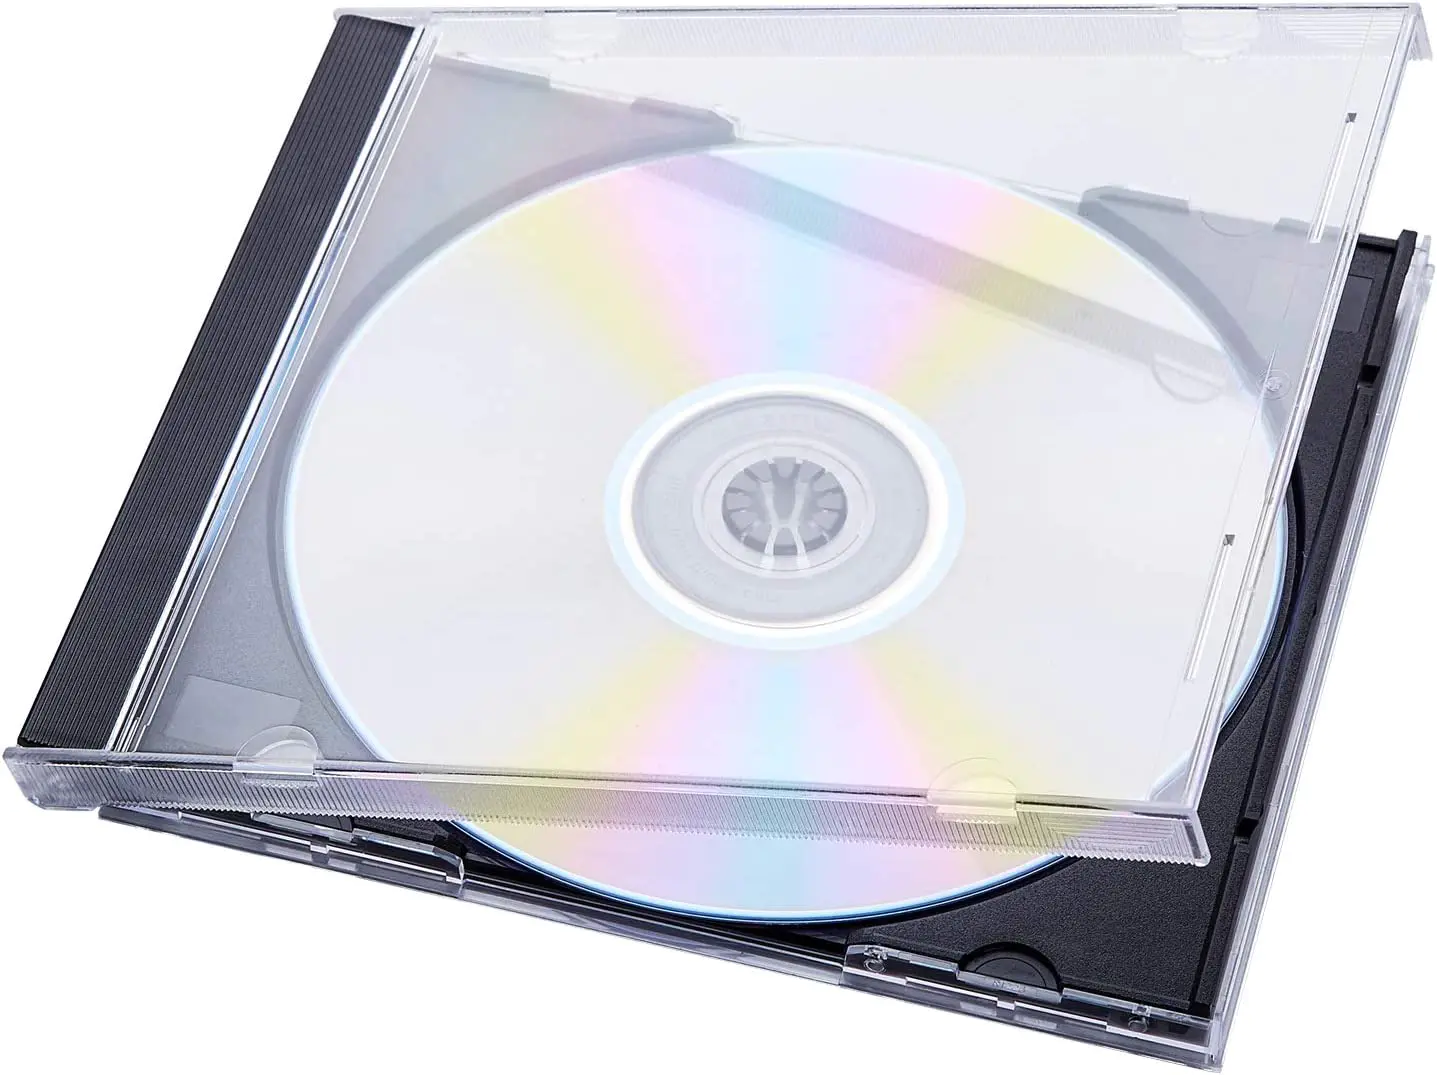 Standard Single Clear CD Jewel Case with Assembled Black Tray